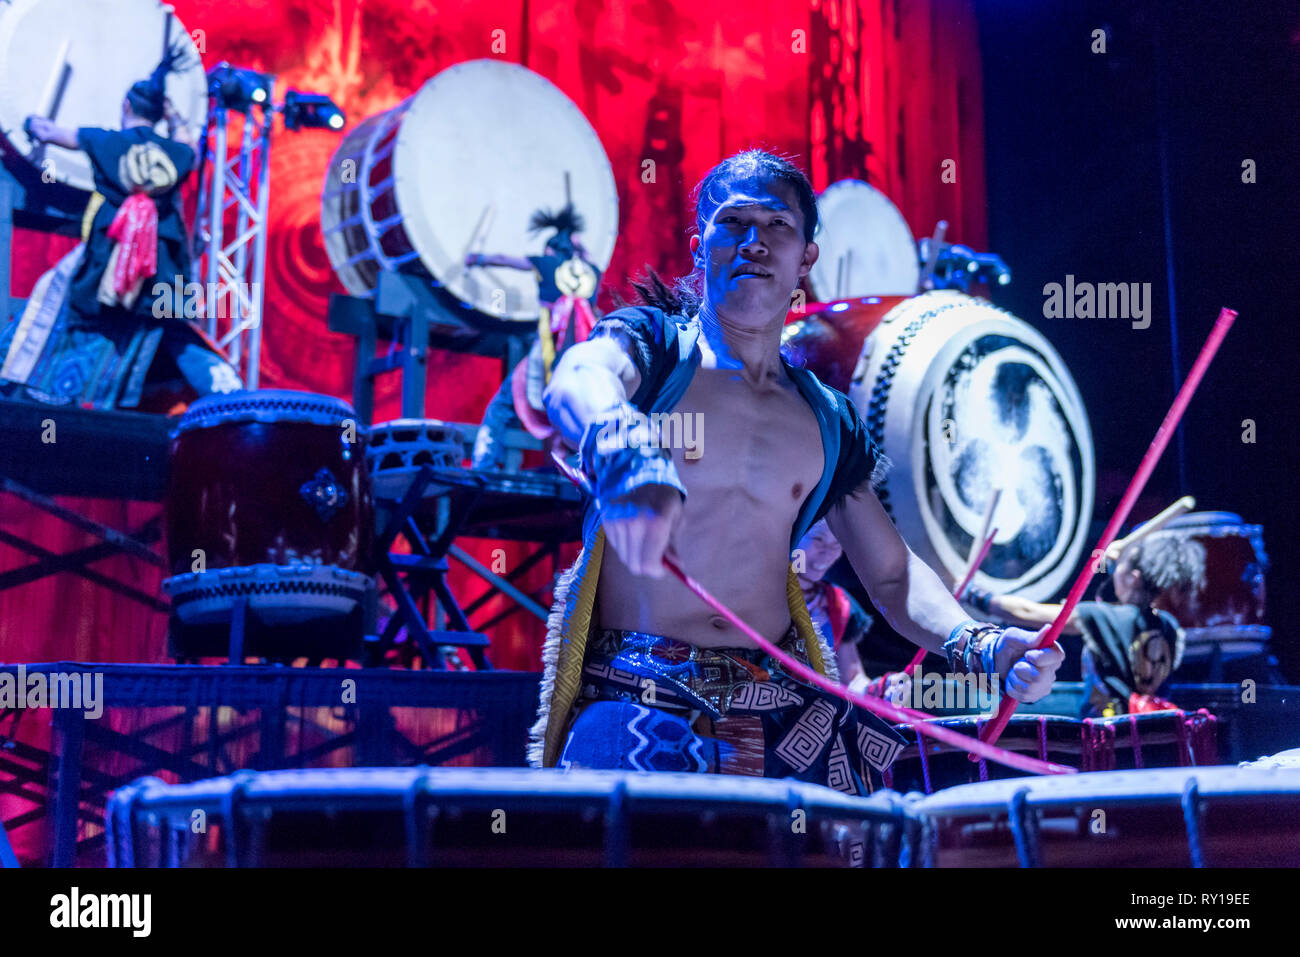 London, UK. 11 March 2019. Jun Kato, a member of Yamato, the Japanese taiko  drumming troupe, previewing their newest work 'Passion'. The show opens to  the public at The Peacock theatre 12